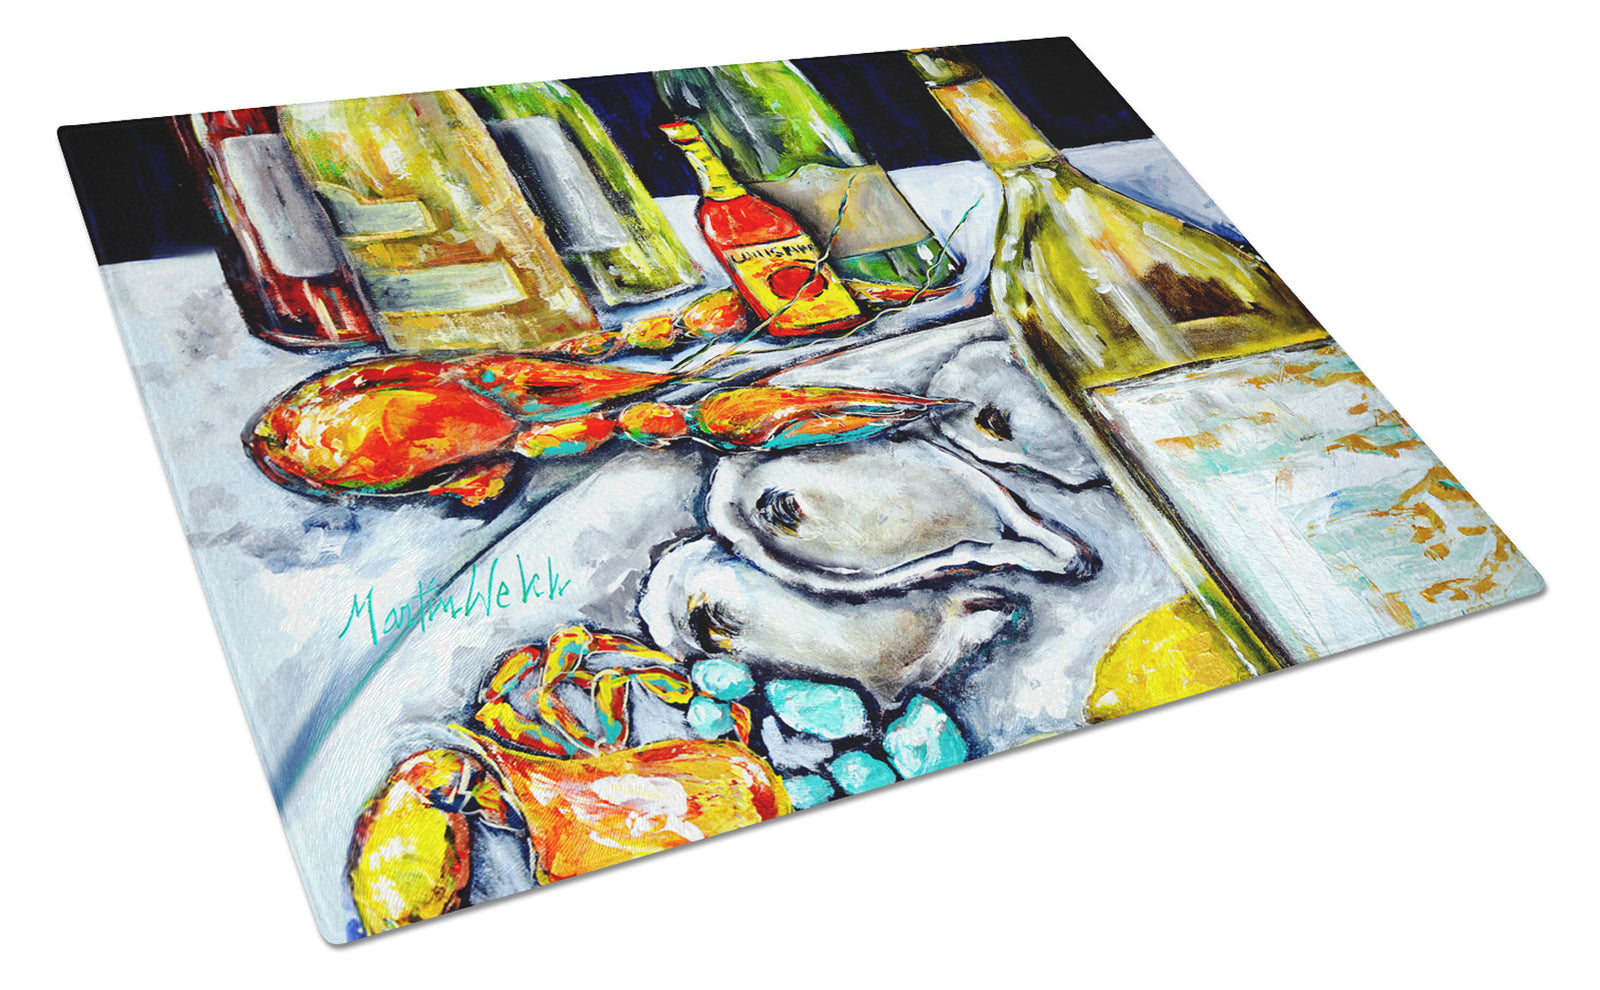 Buy this Sit A Spell Seafood Dinner Glass Cutting Board